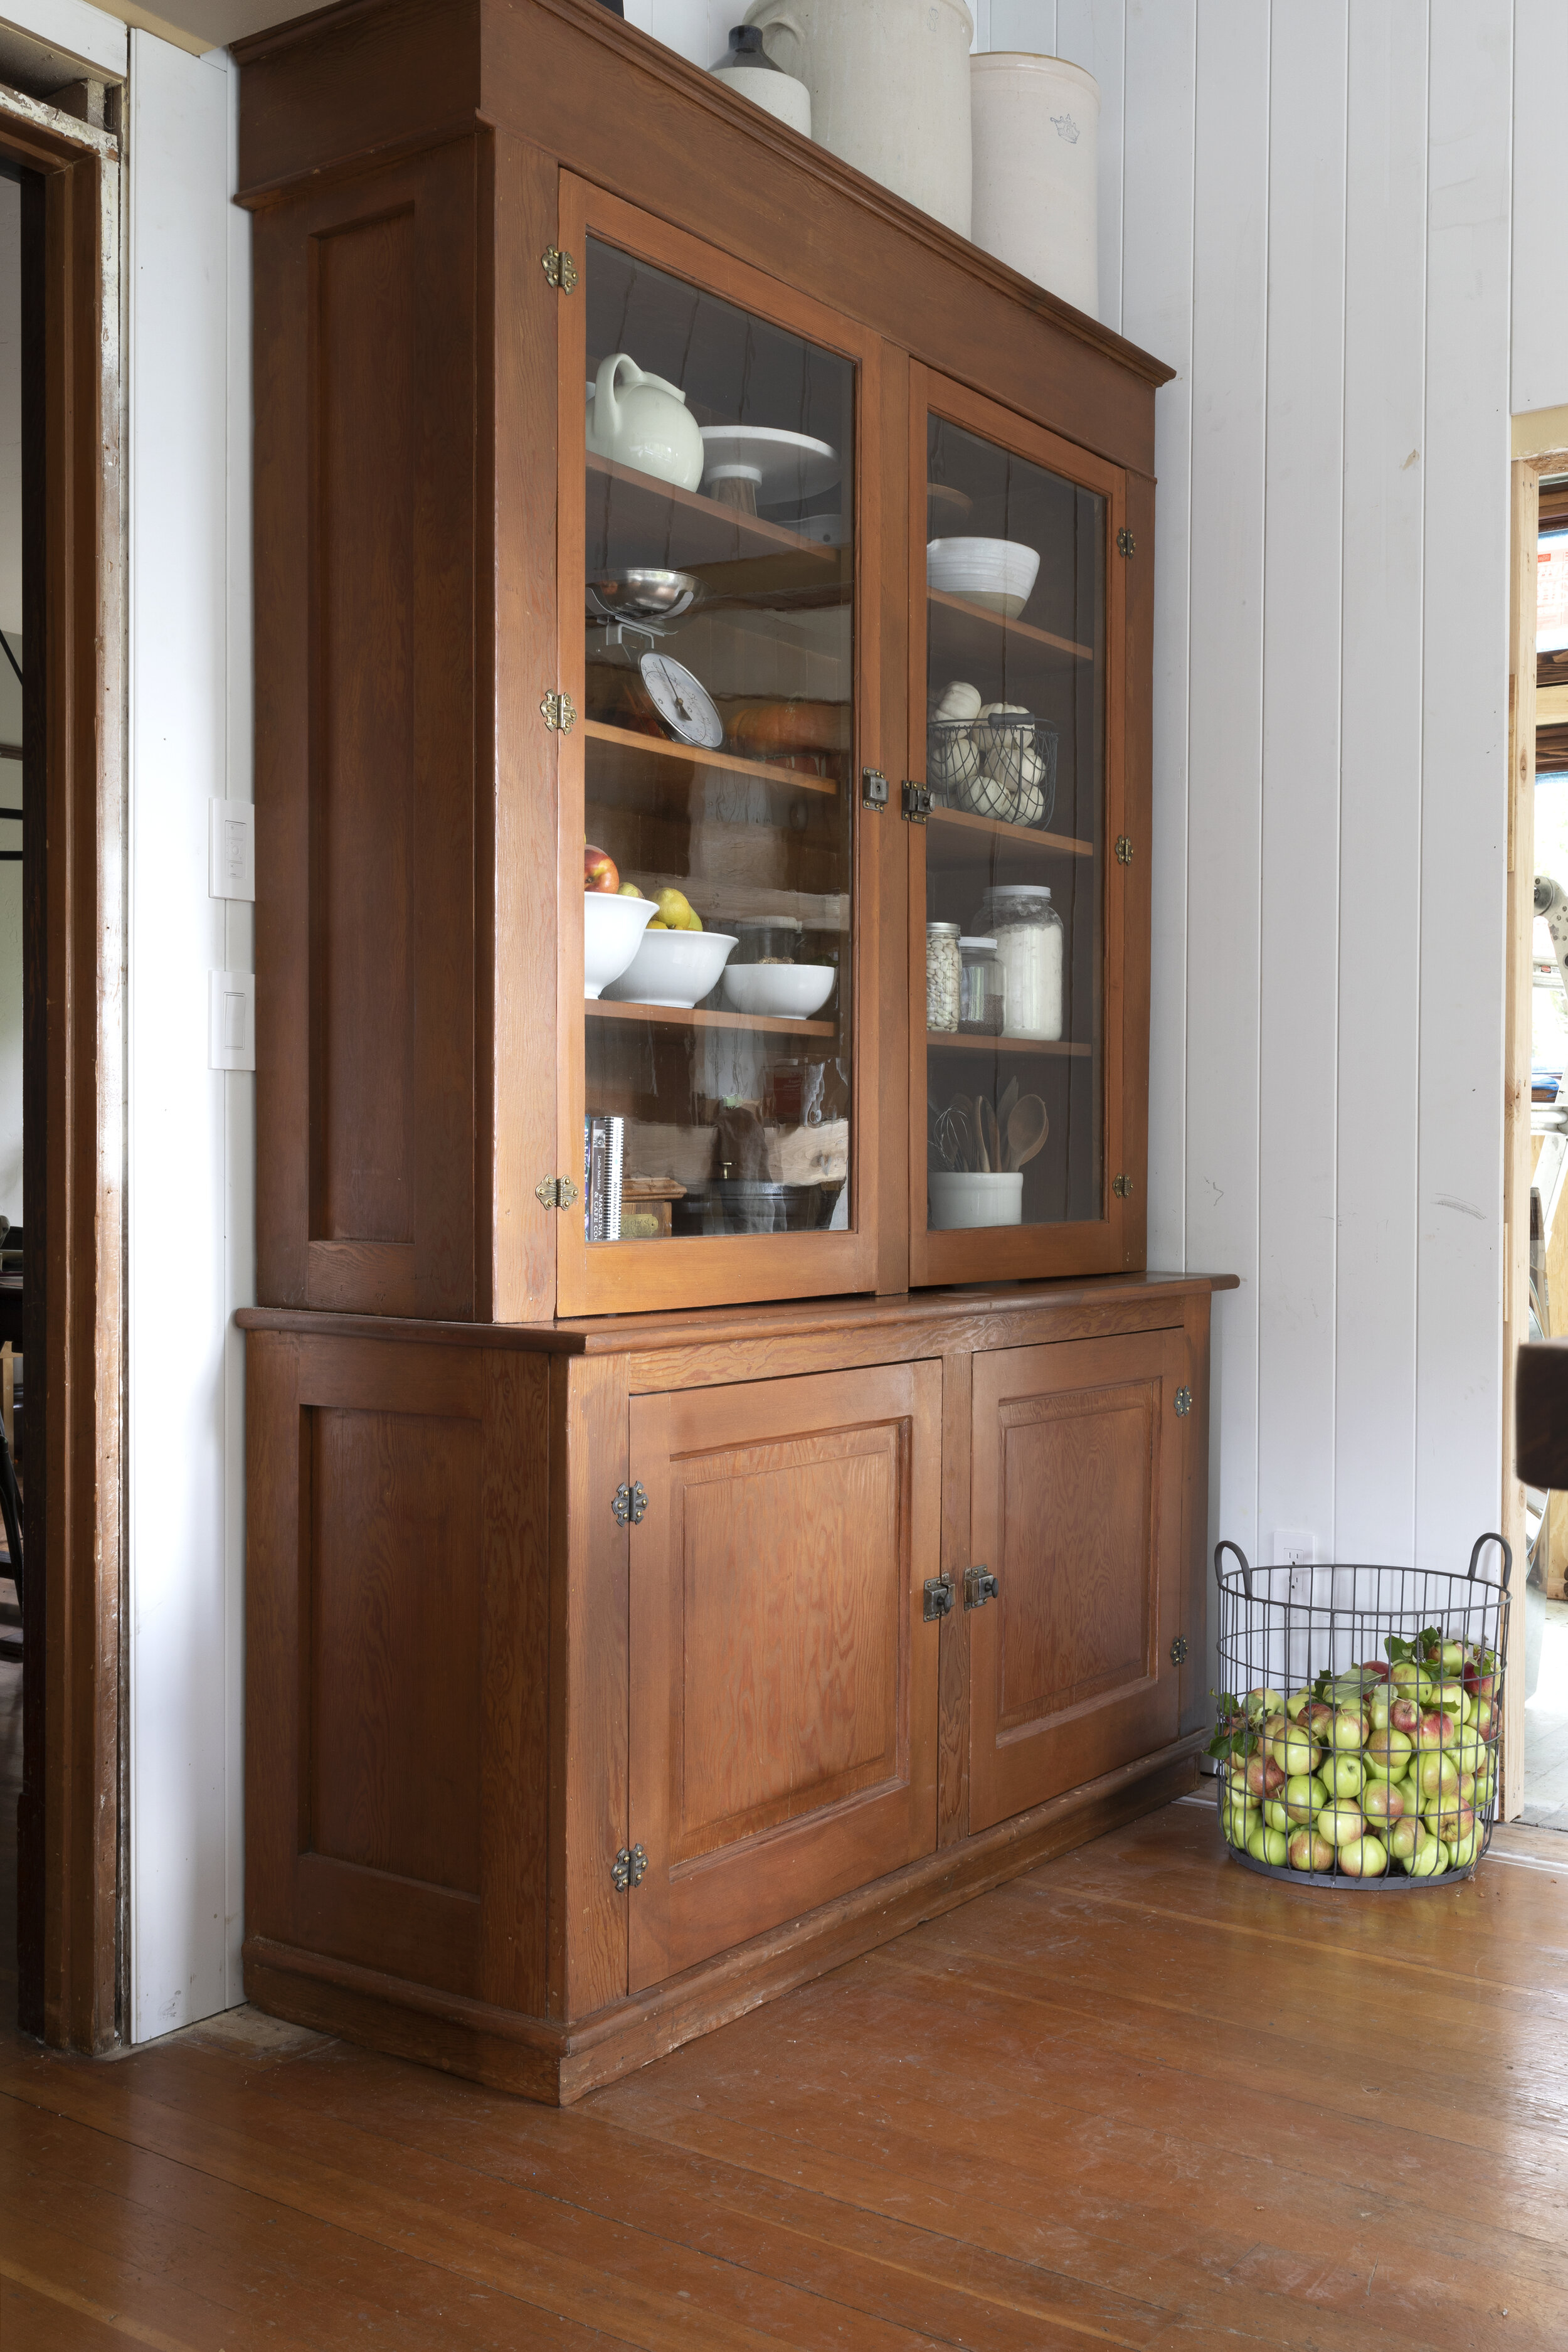 How To Move Antique Furniture - Storage Solutions Blog